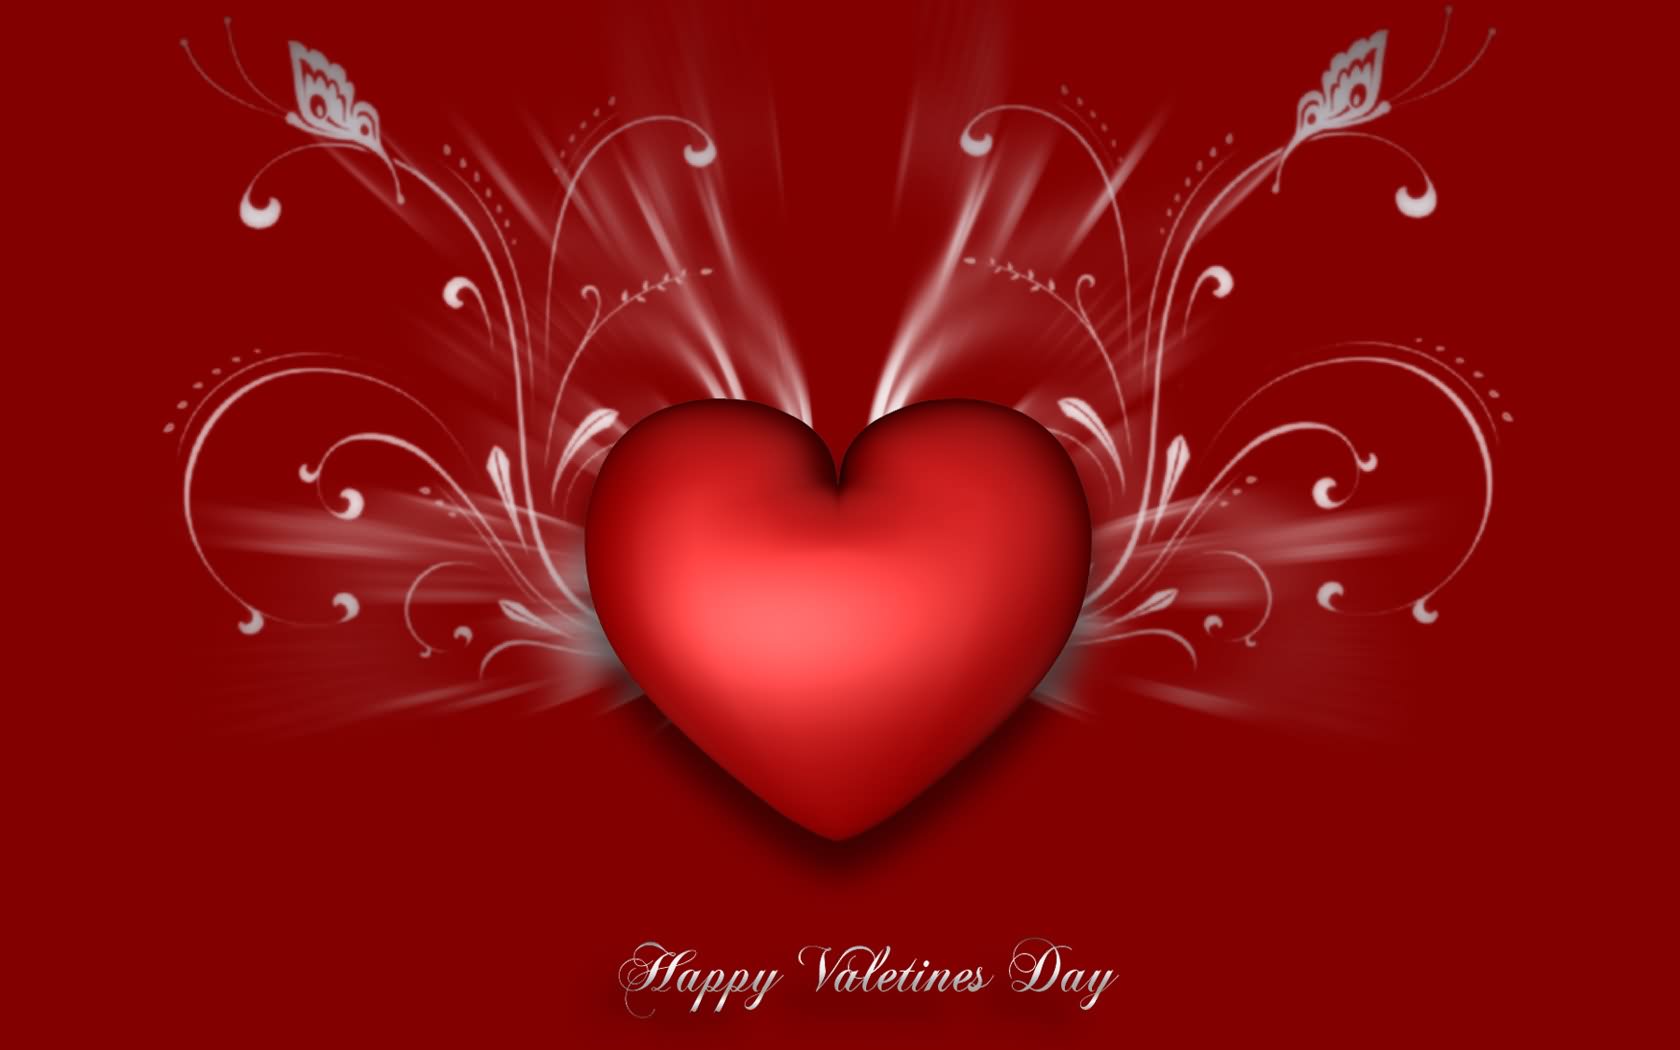 Wonderful Valentines Day Wishes Pictures